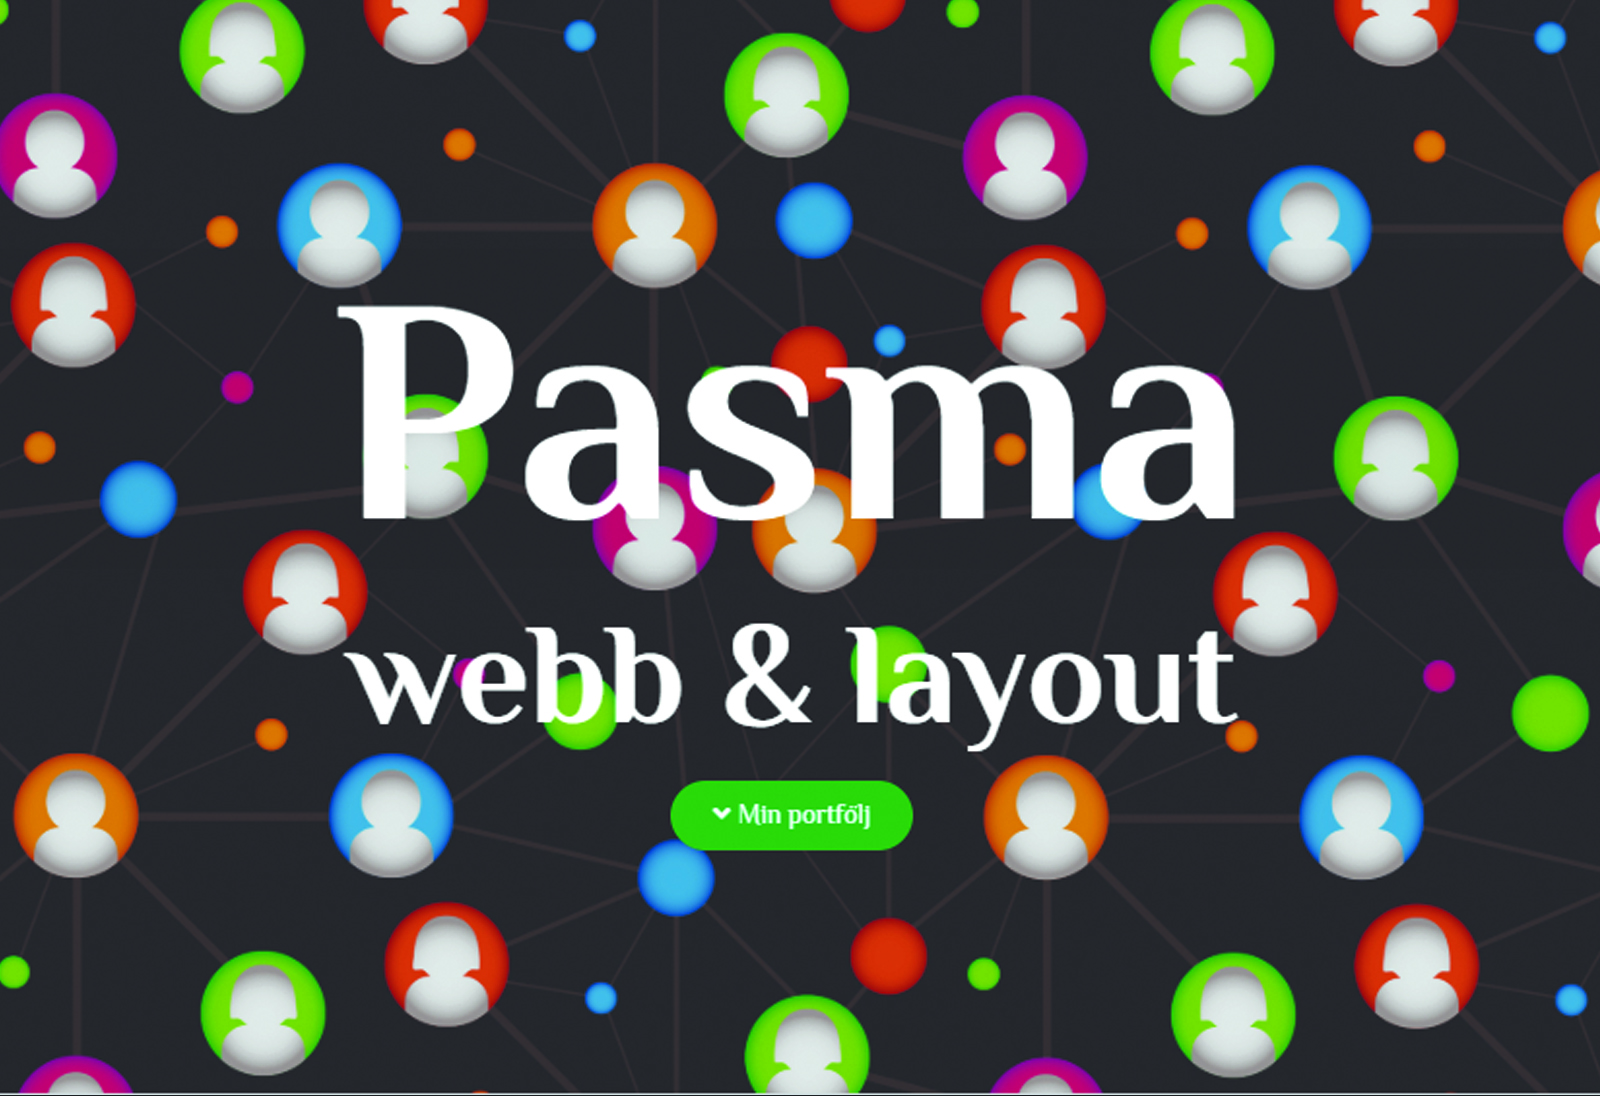 You are currently viewing Pasma webb&layout